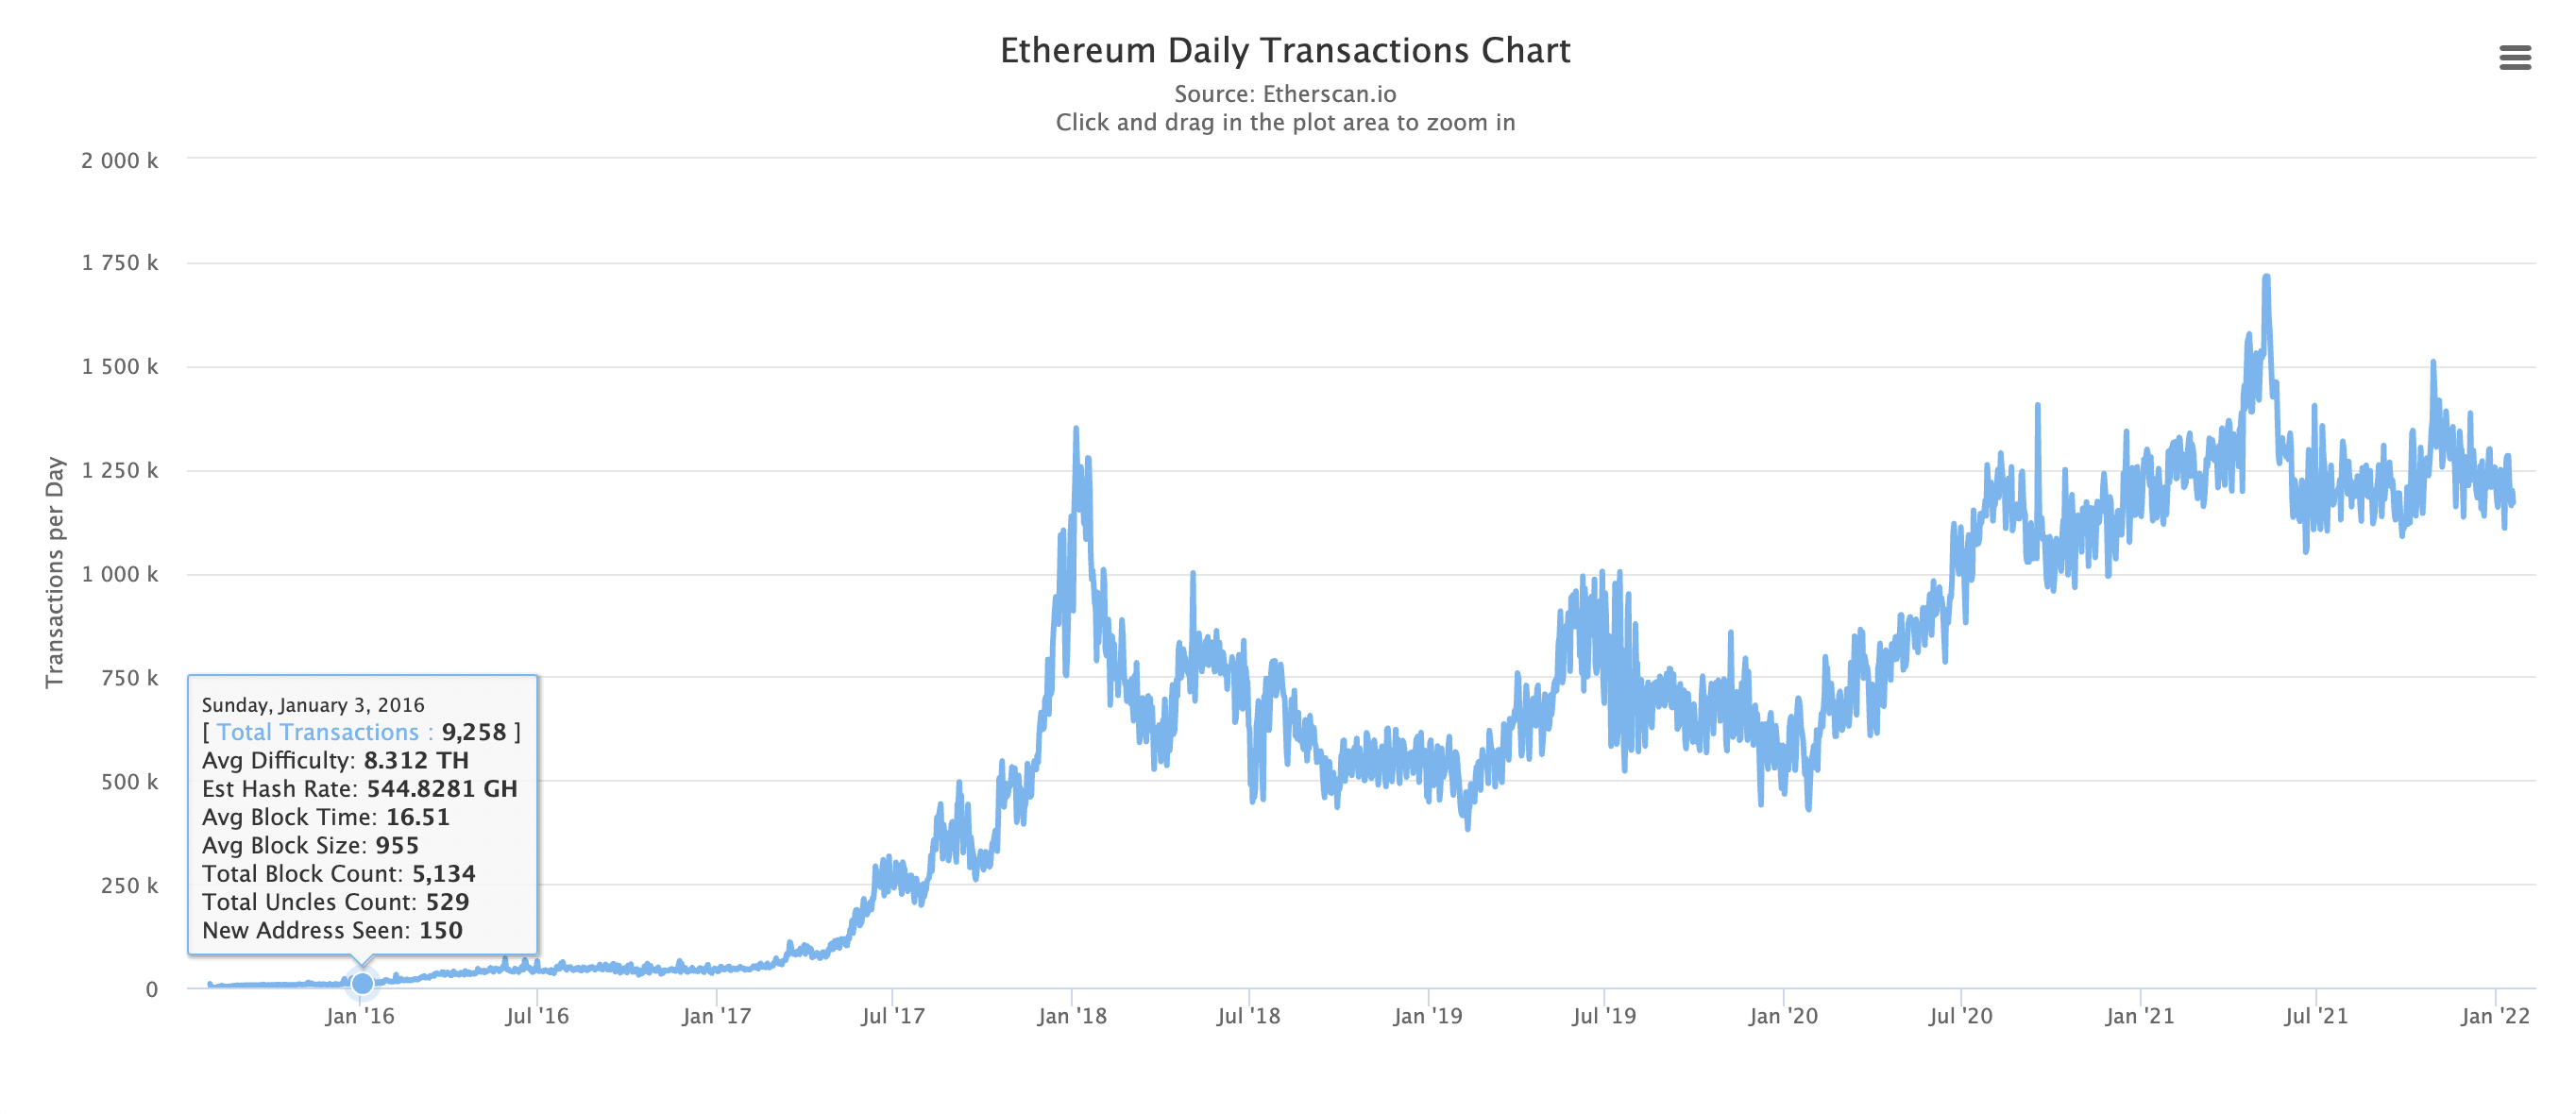 Ethereum Daily Transactions - Source: snowtrace.io